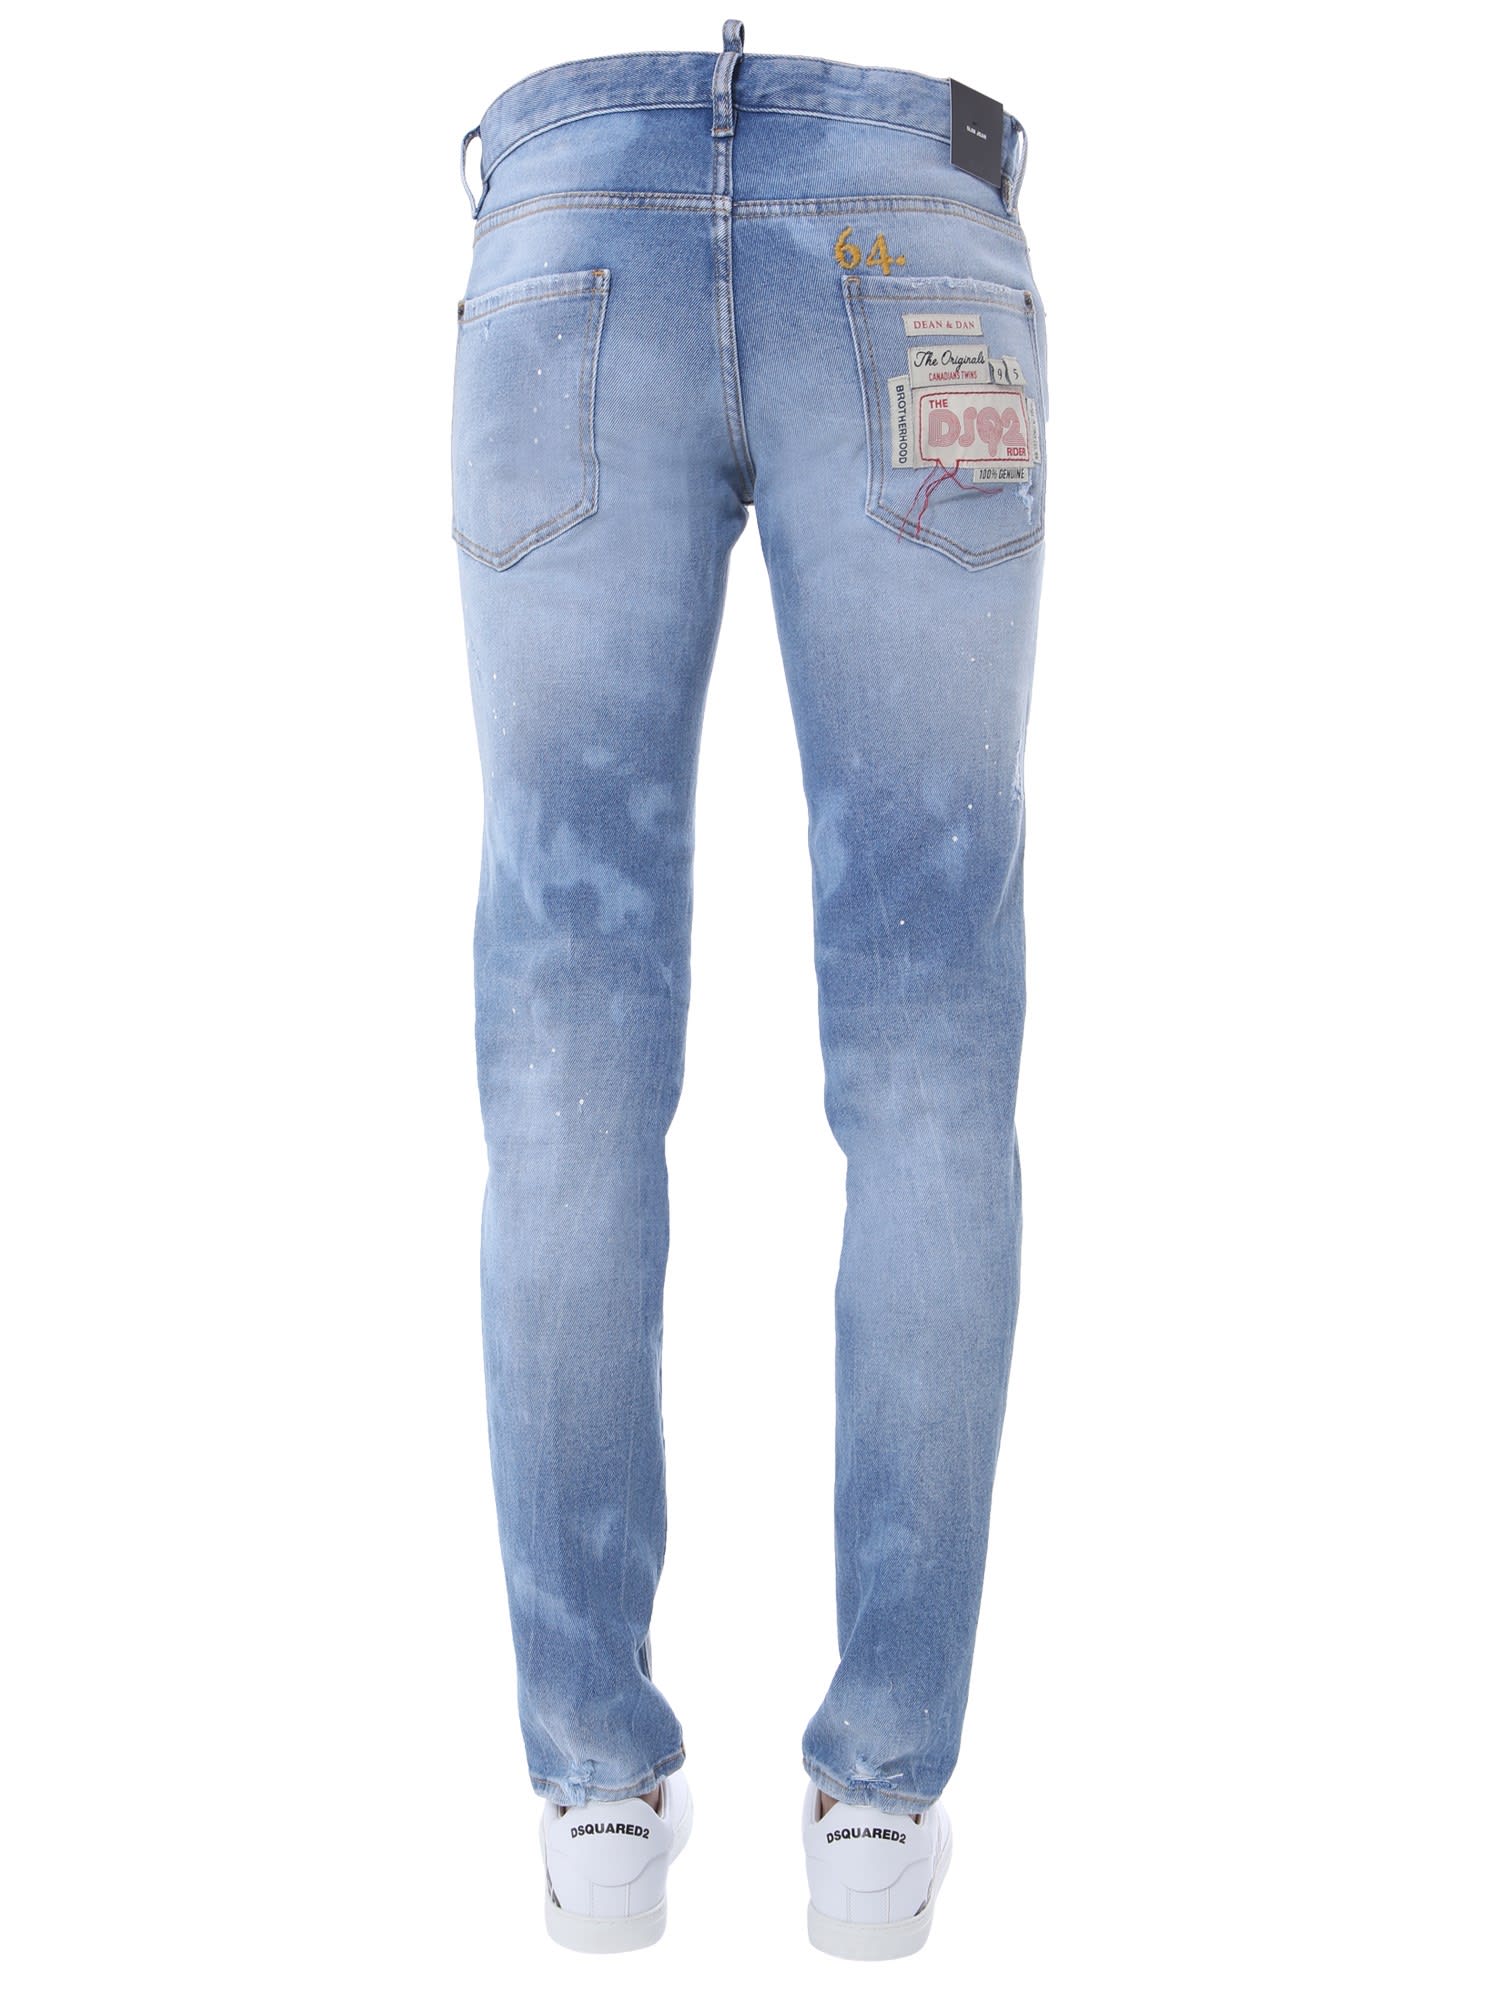 dsquared2 dean and dan jeans